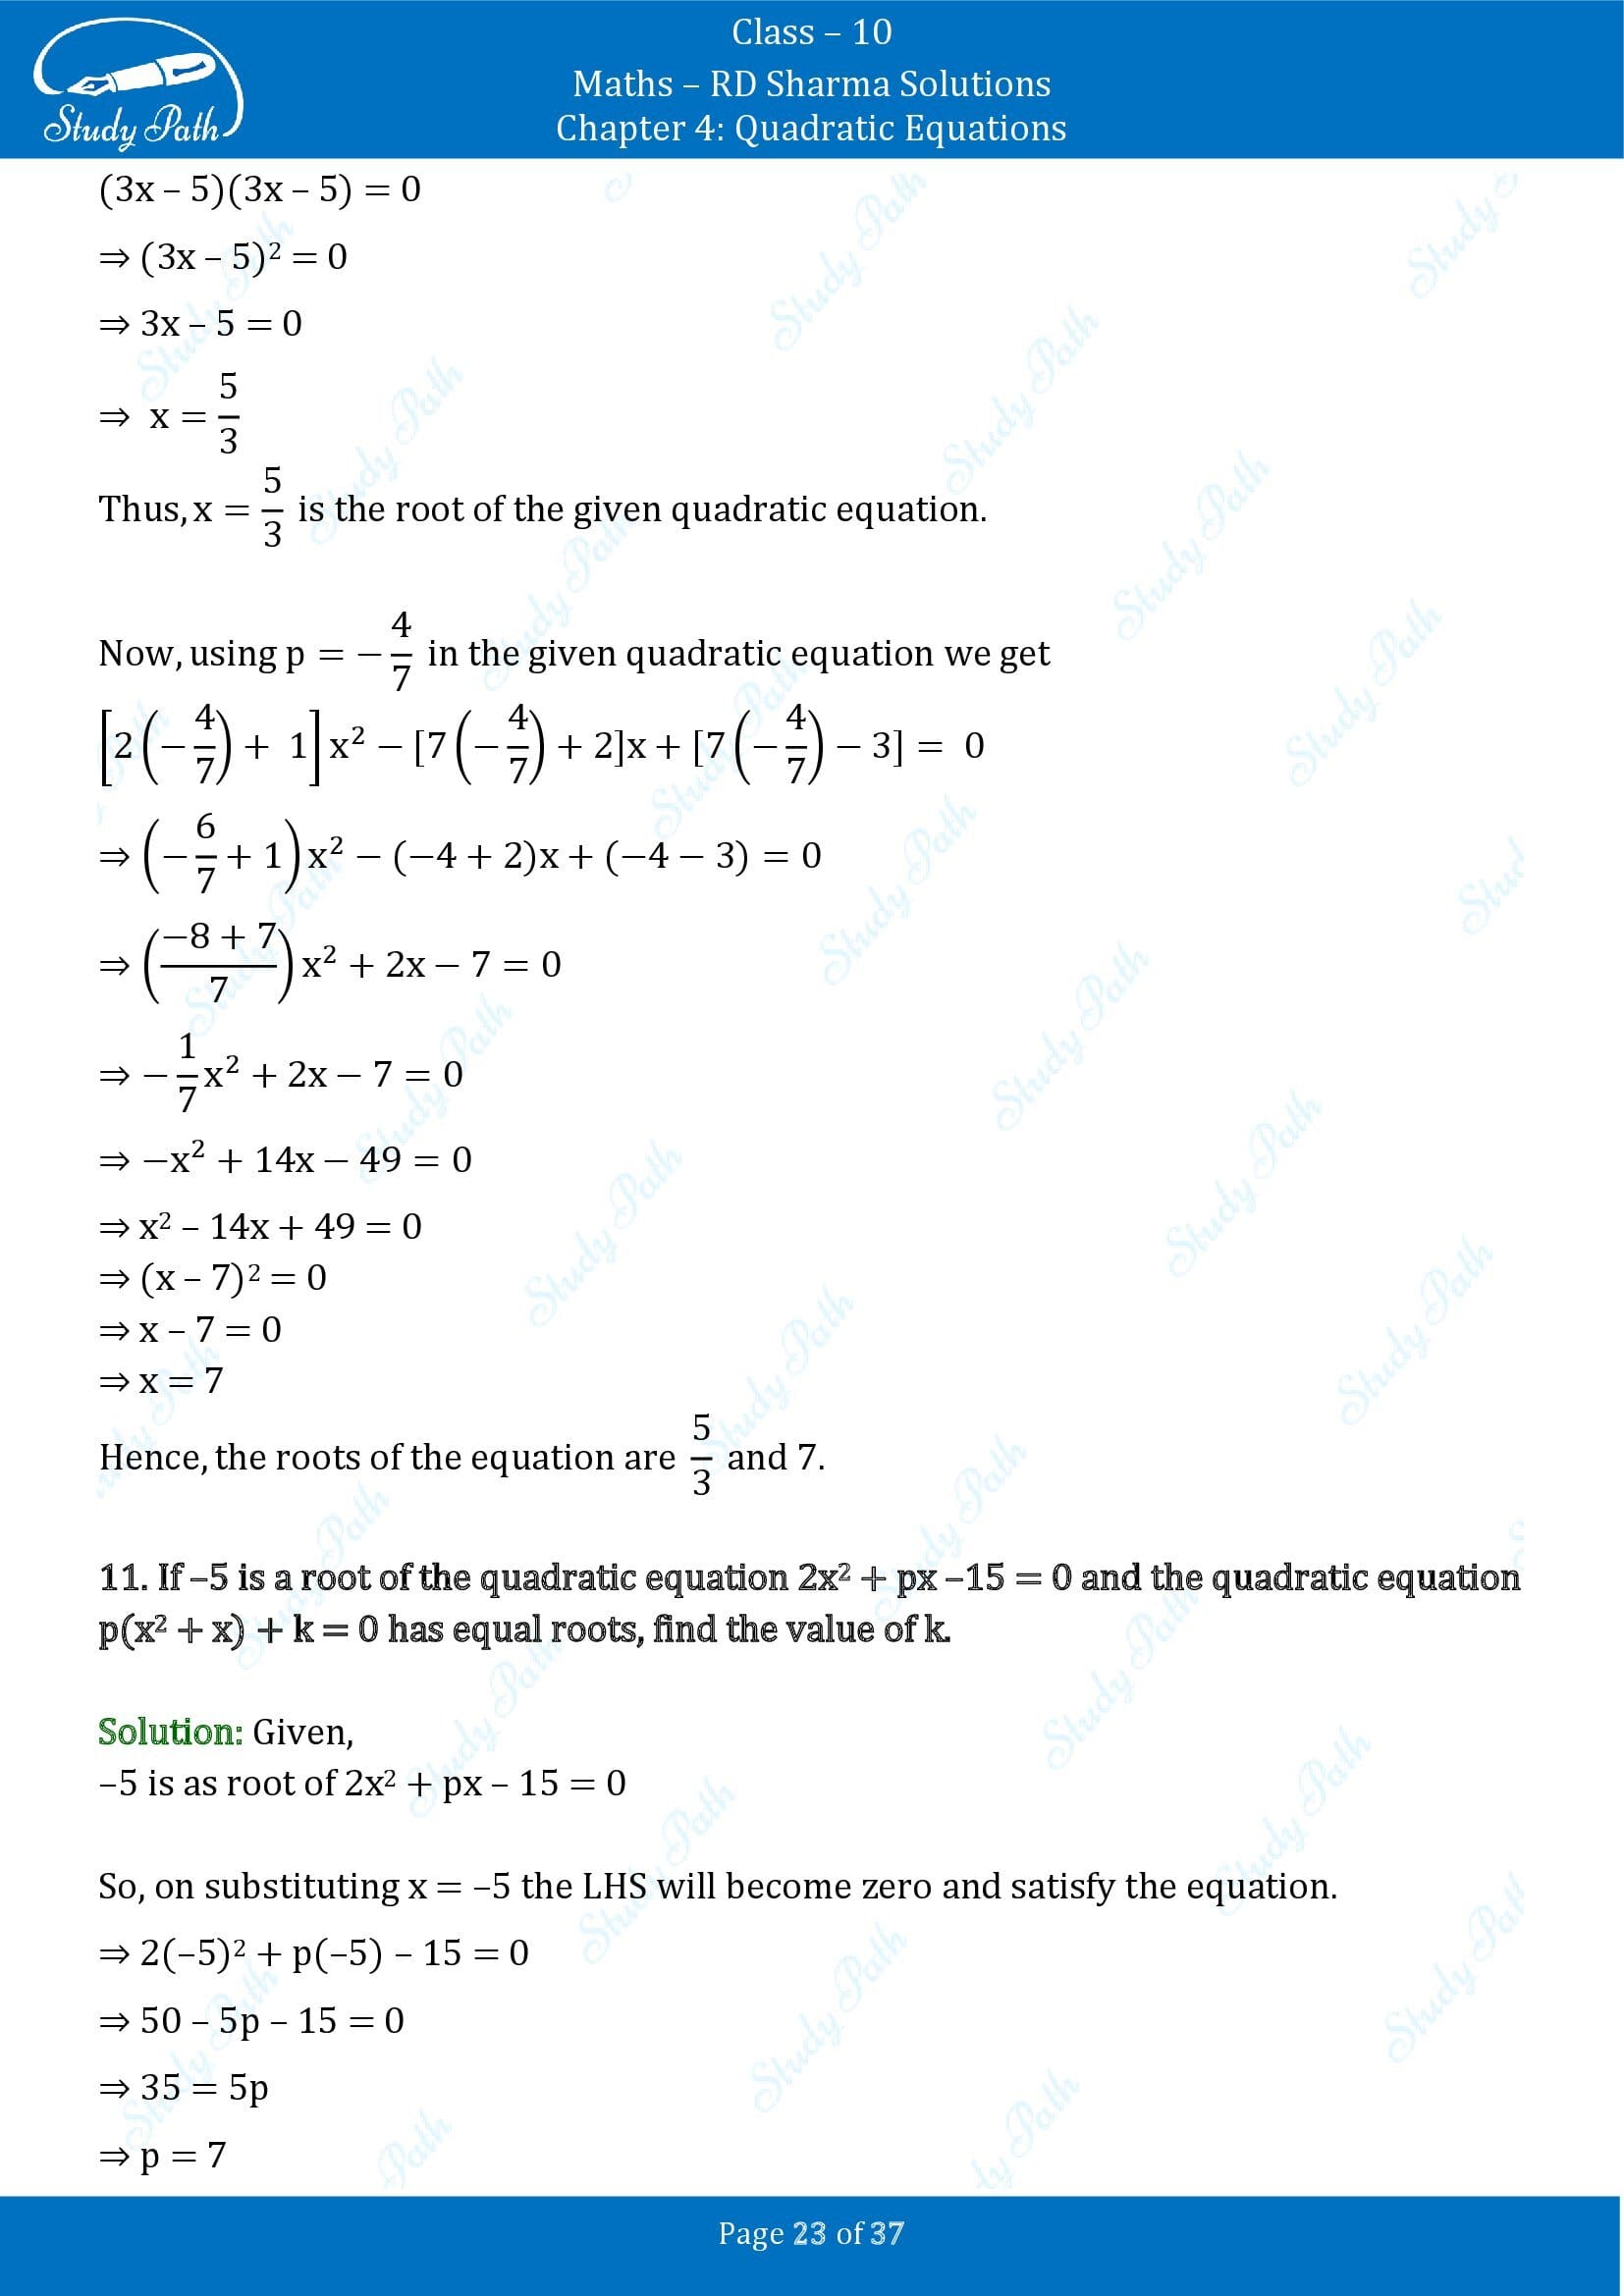 RD Sharma Solutions Class 10 Chapter 4 Quadratic Equations Exercise 4.6 00023